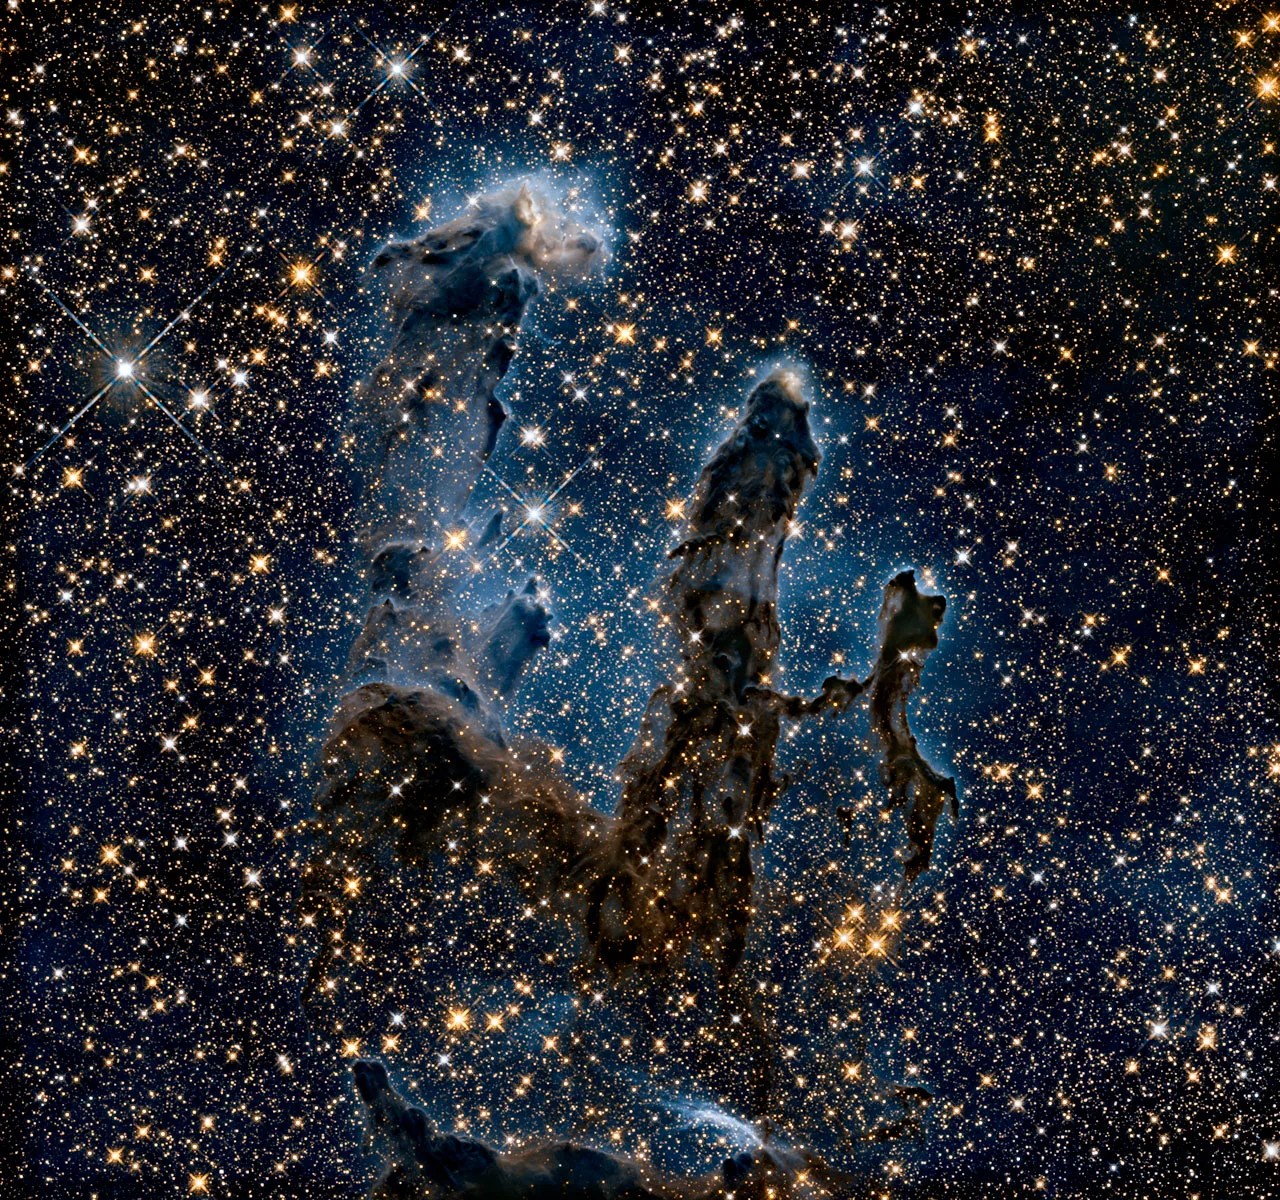 Thousands of stars are seen behind and inside the dust and gas towers in an infrared view of M16